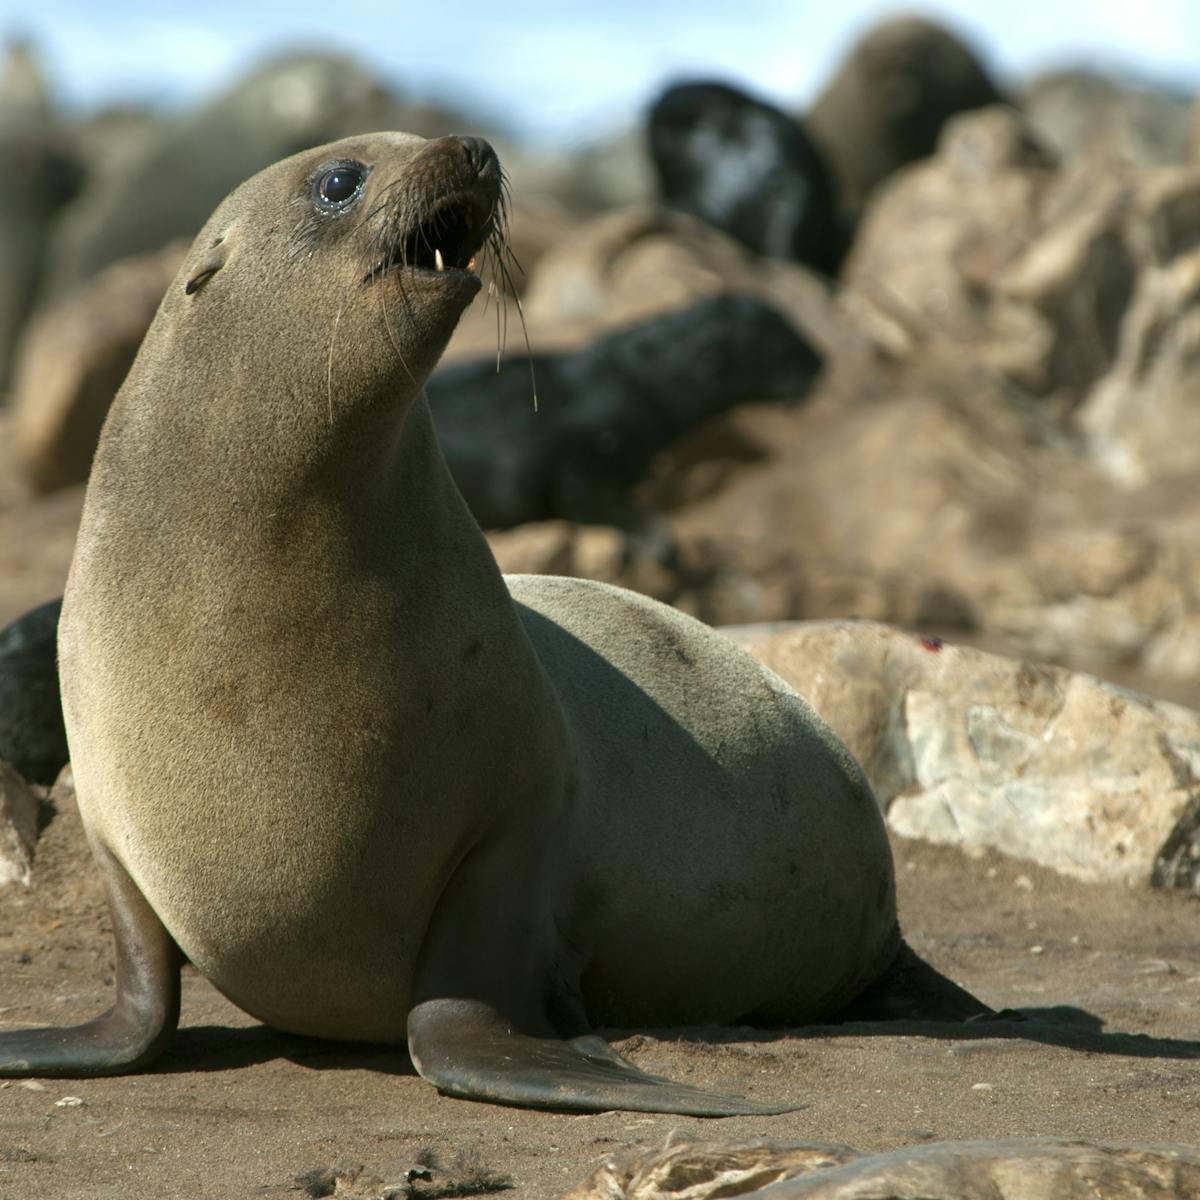 Flipper traces reveal the presence of ancient seals on South Africa's coast